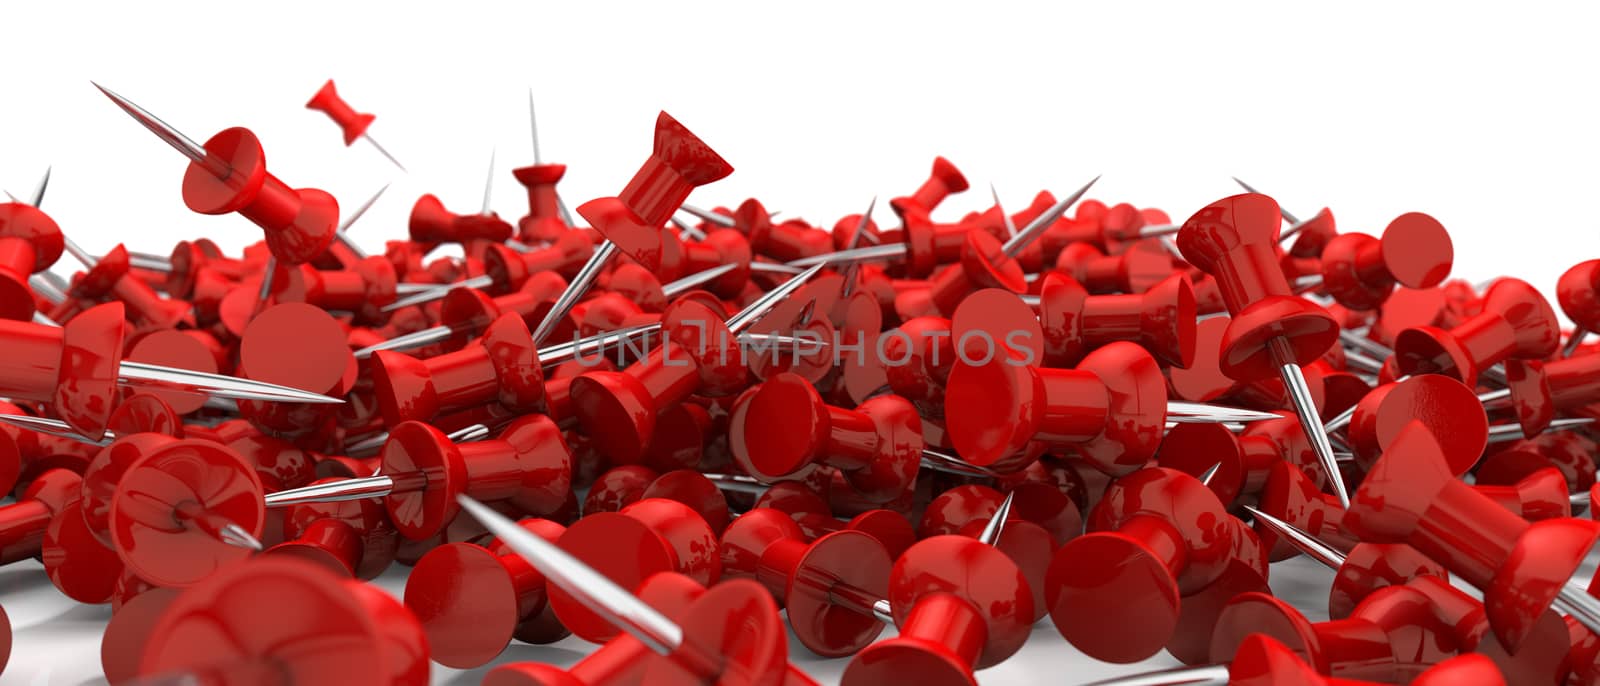 red push pins scattered over white surface by stockbp